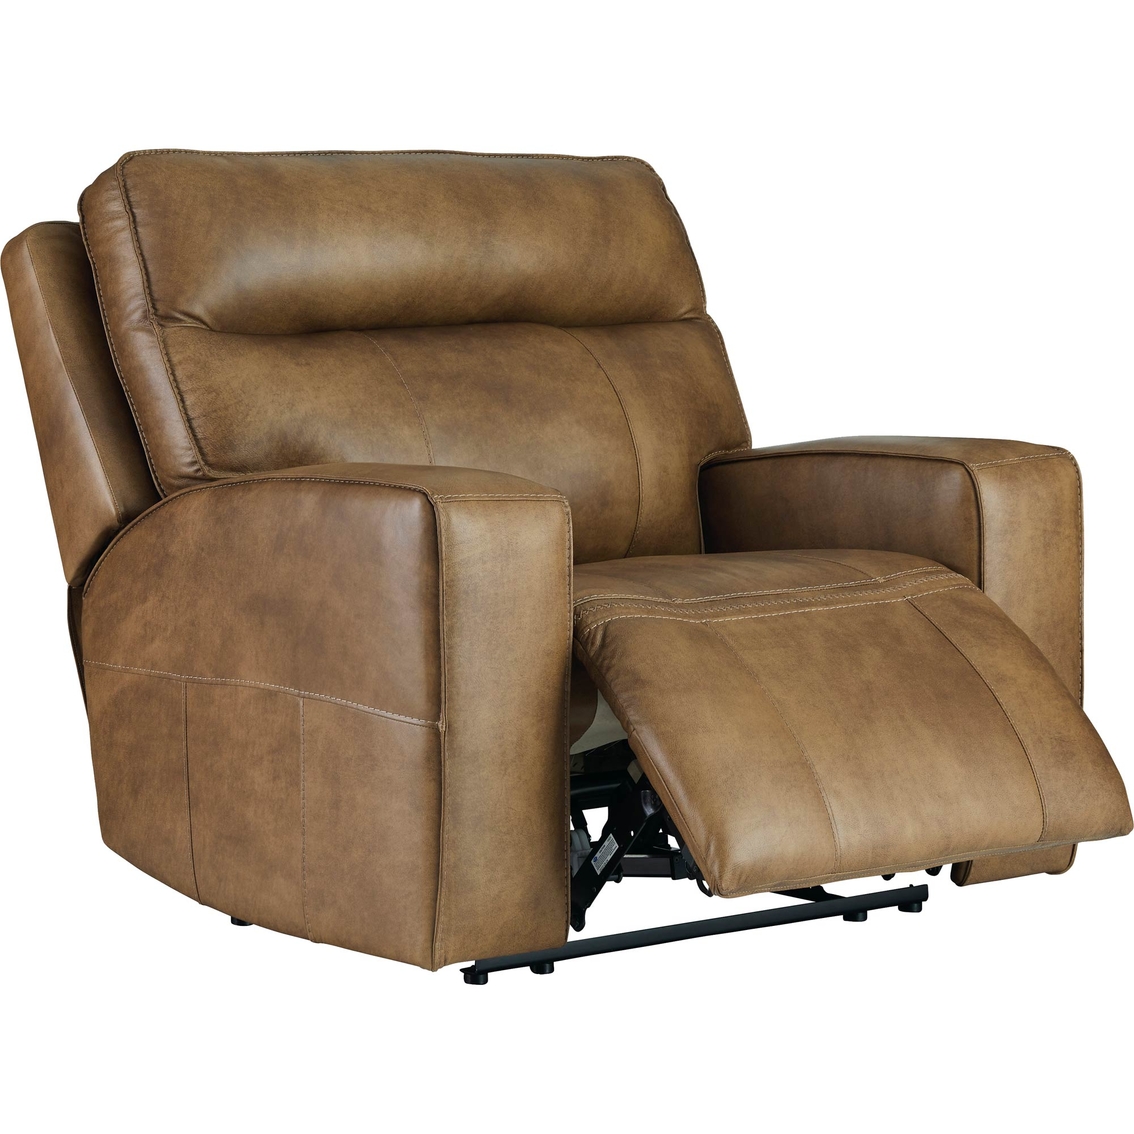 Signature Design By Ashley Game Plan Oversized Power Recliner | Chairs ...